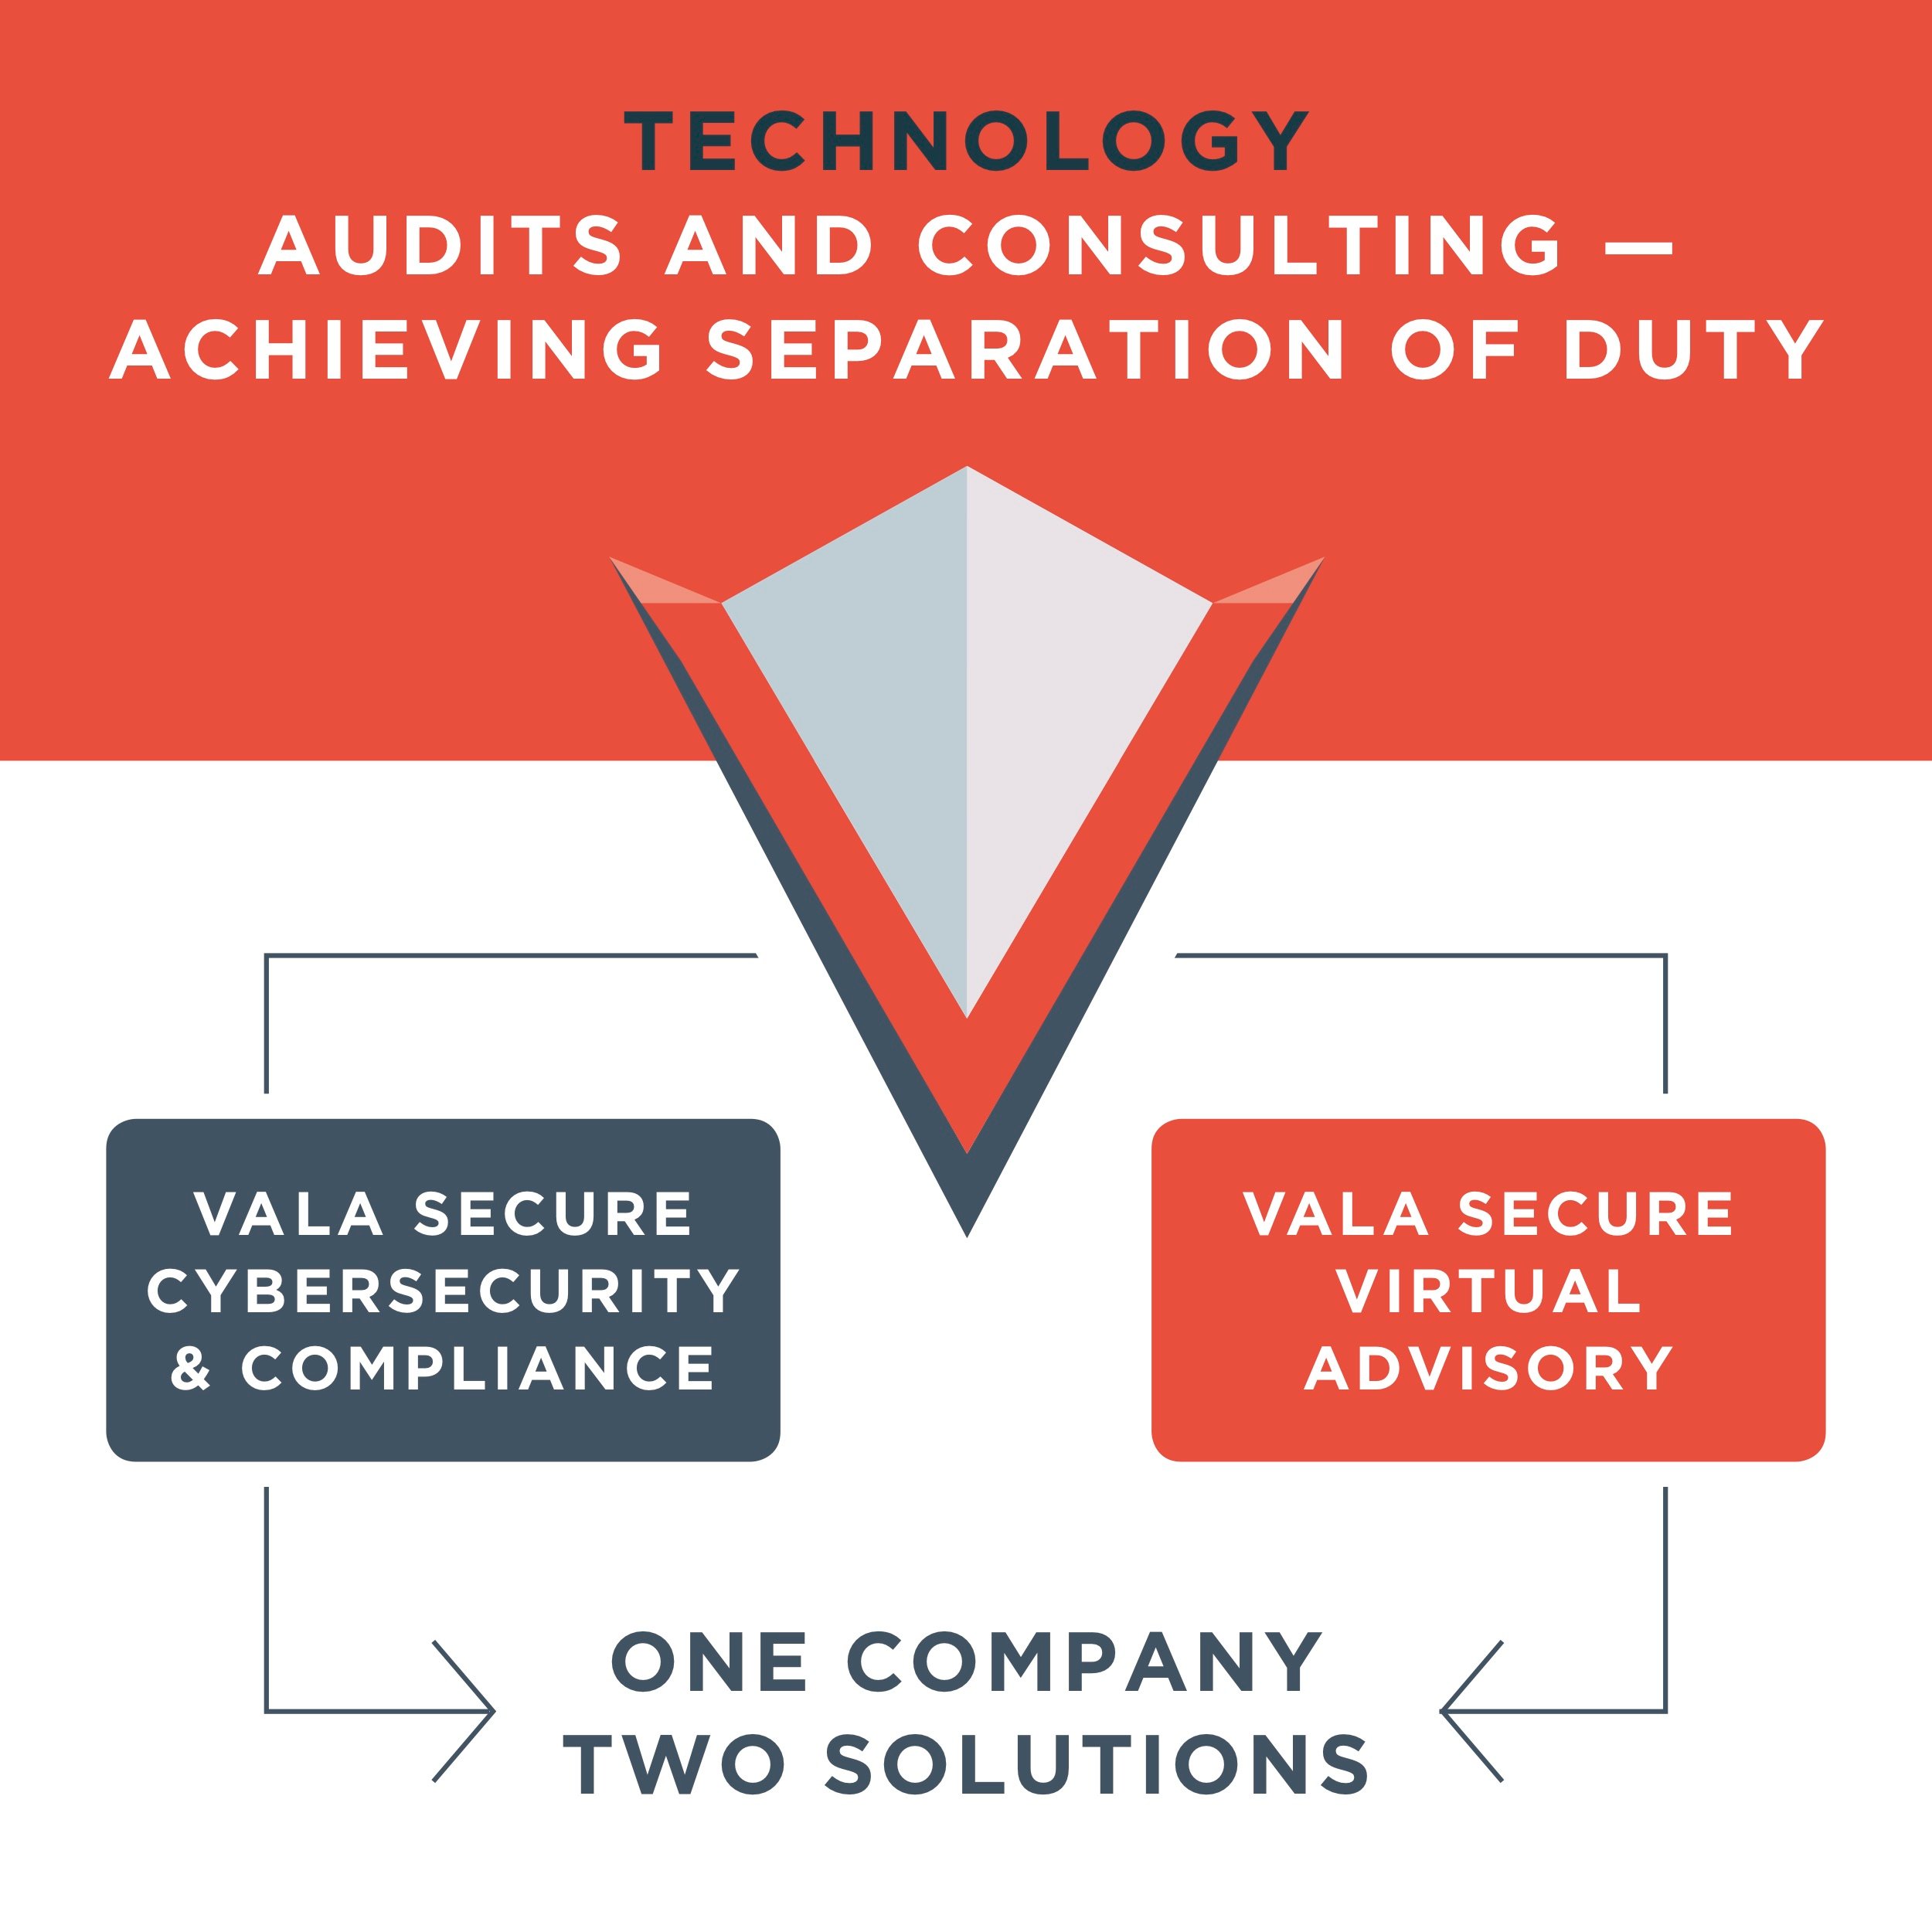 Technology Audits and Consulting - Achieving Separation of Duty - Vala Secure1